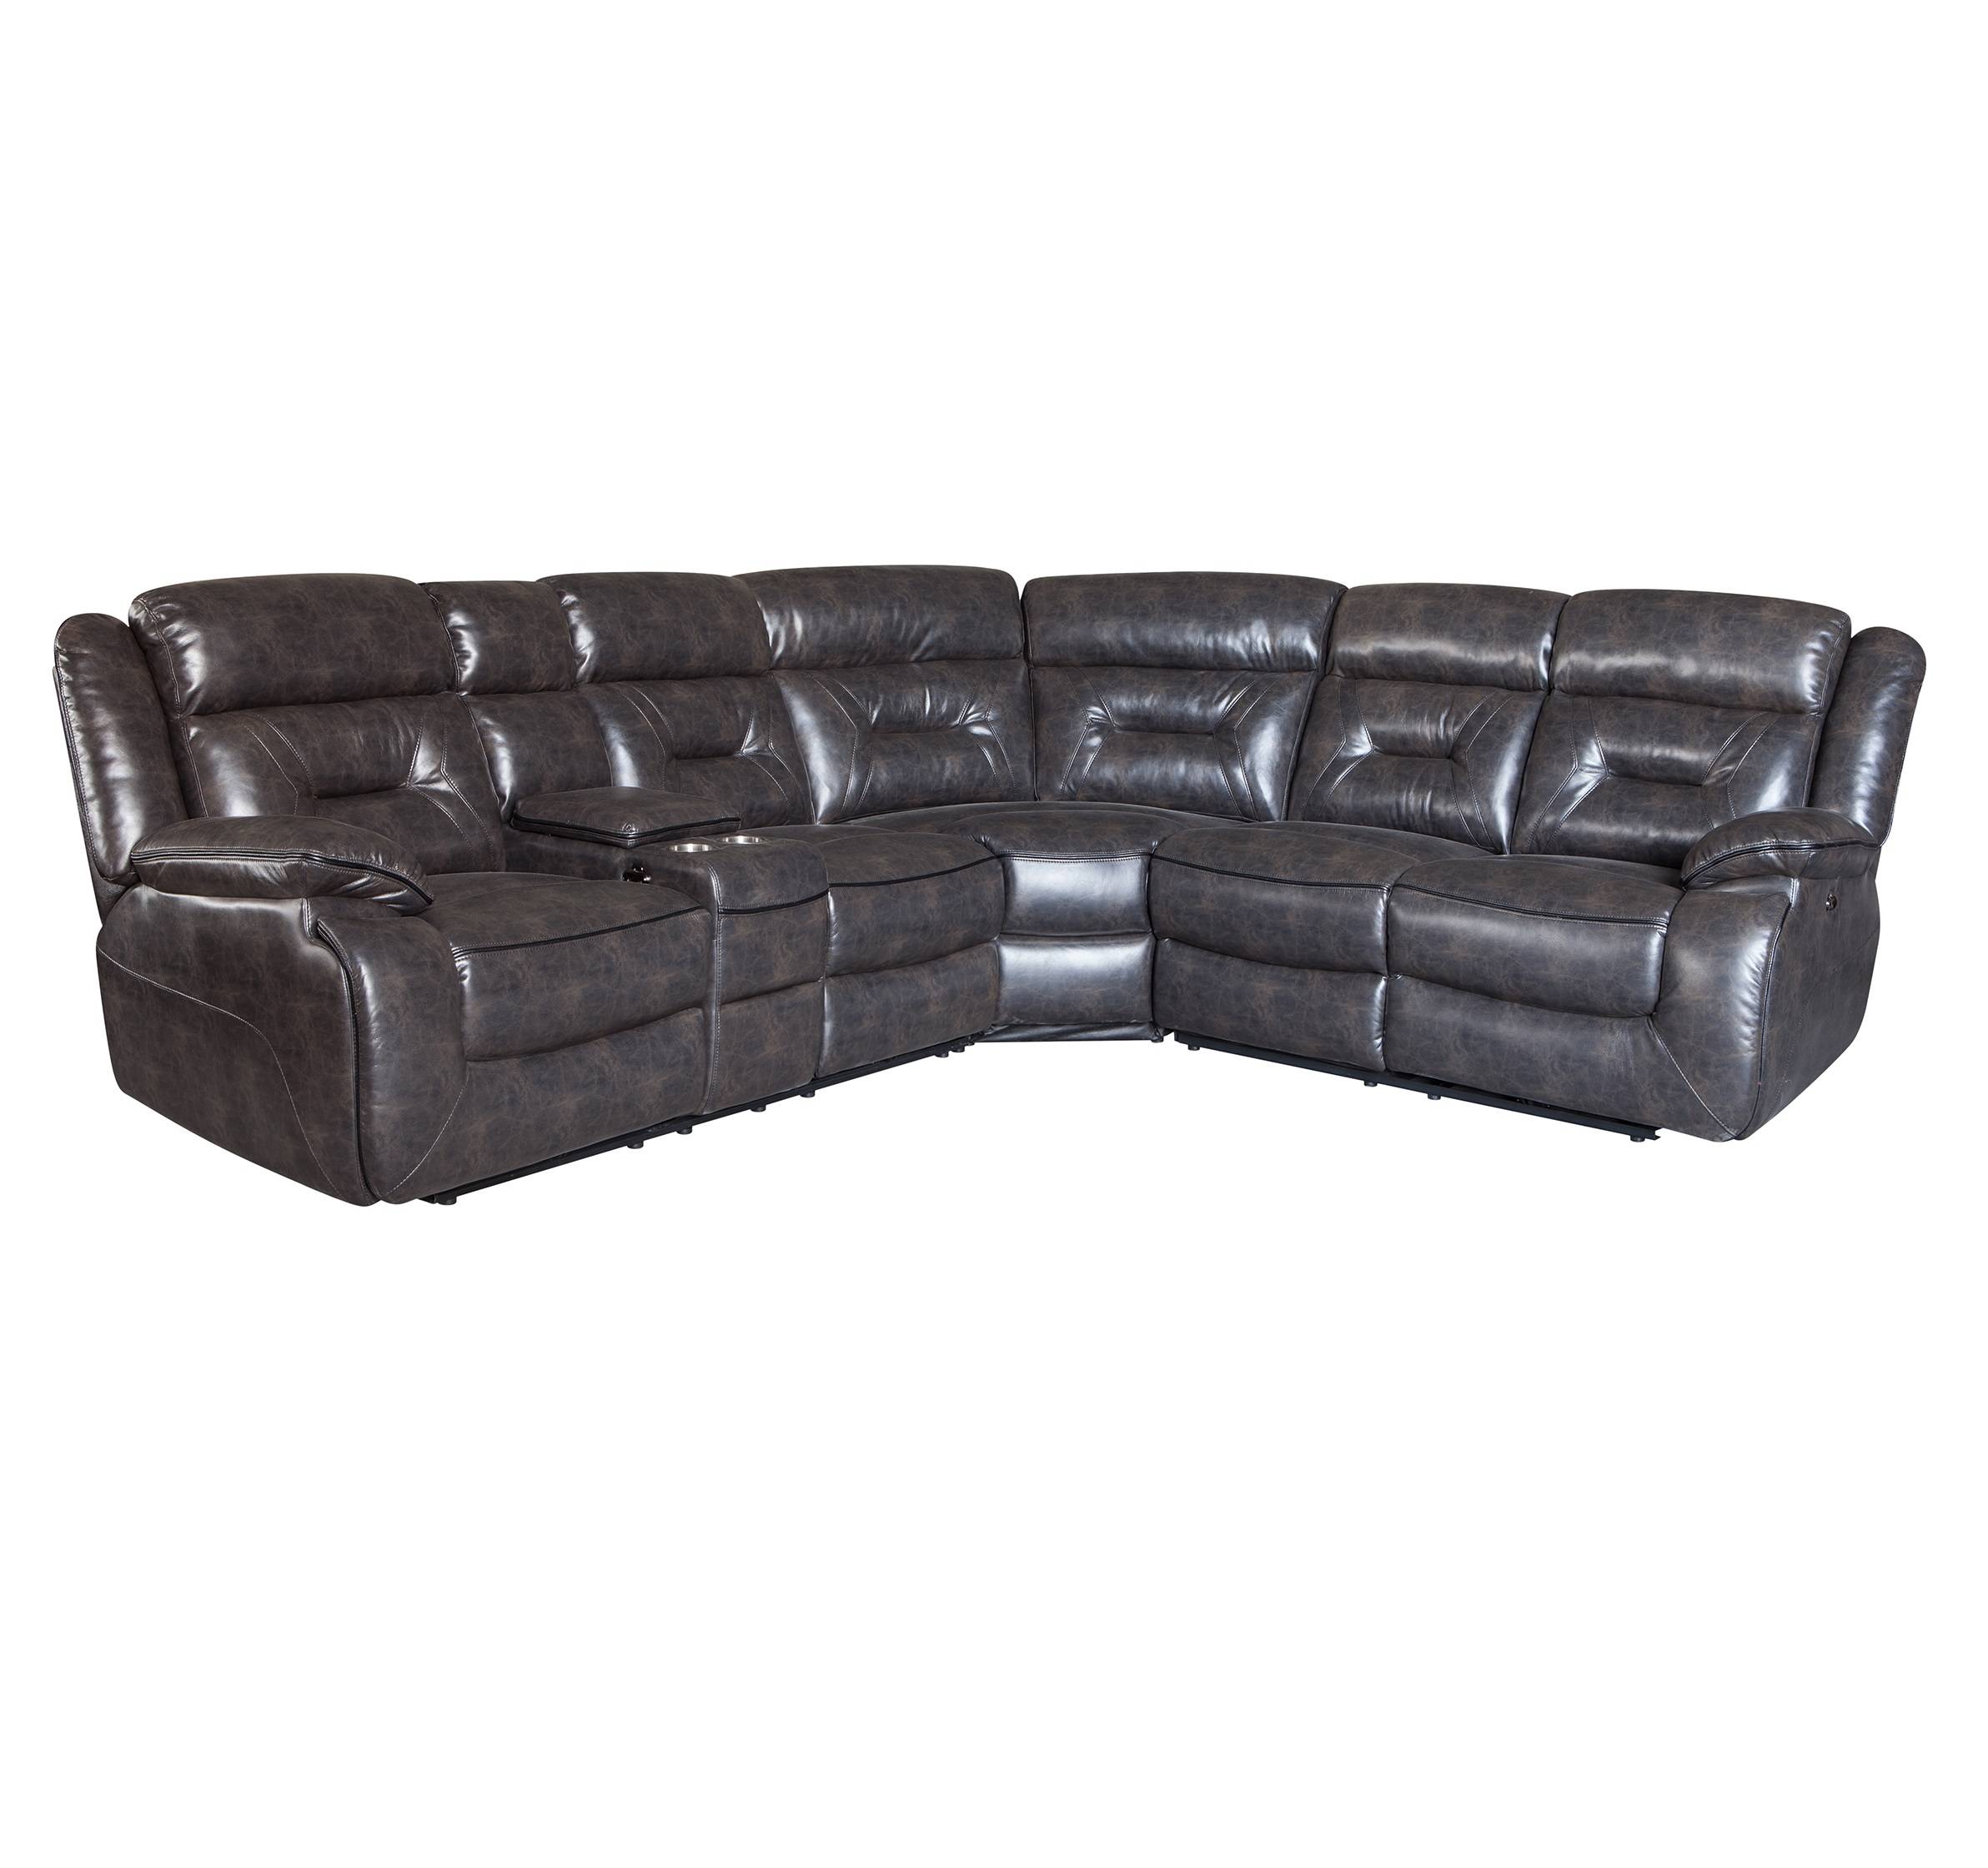 Functional cinema recliner leather sectional sofa with cup holder